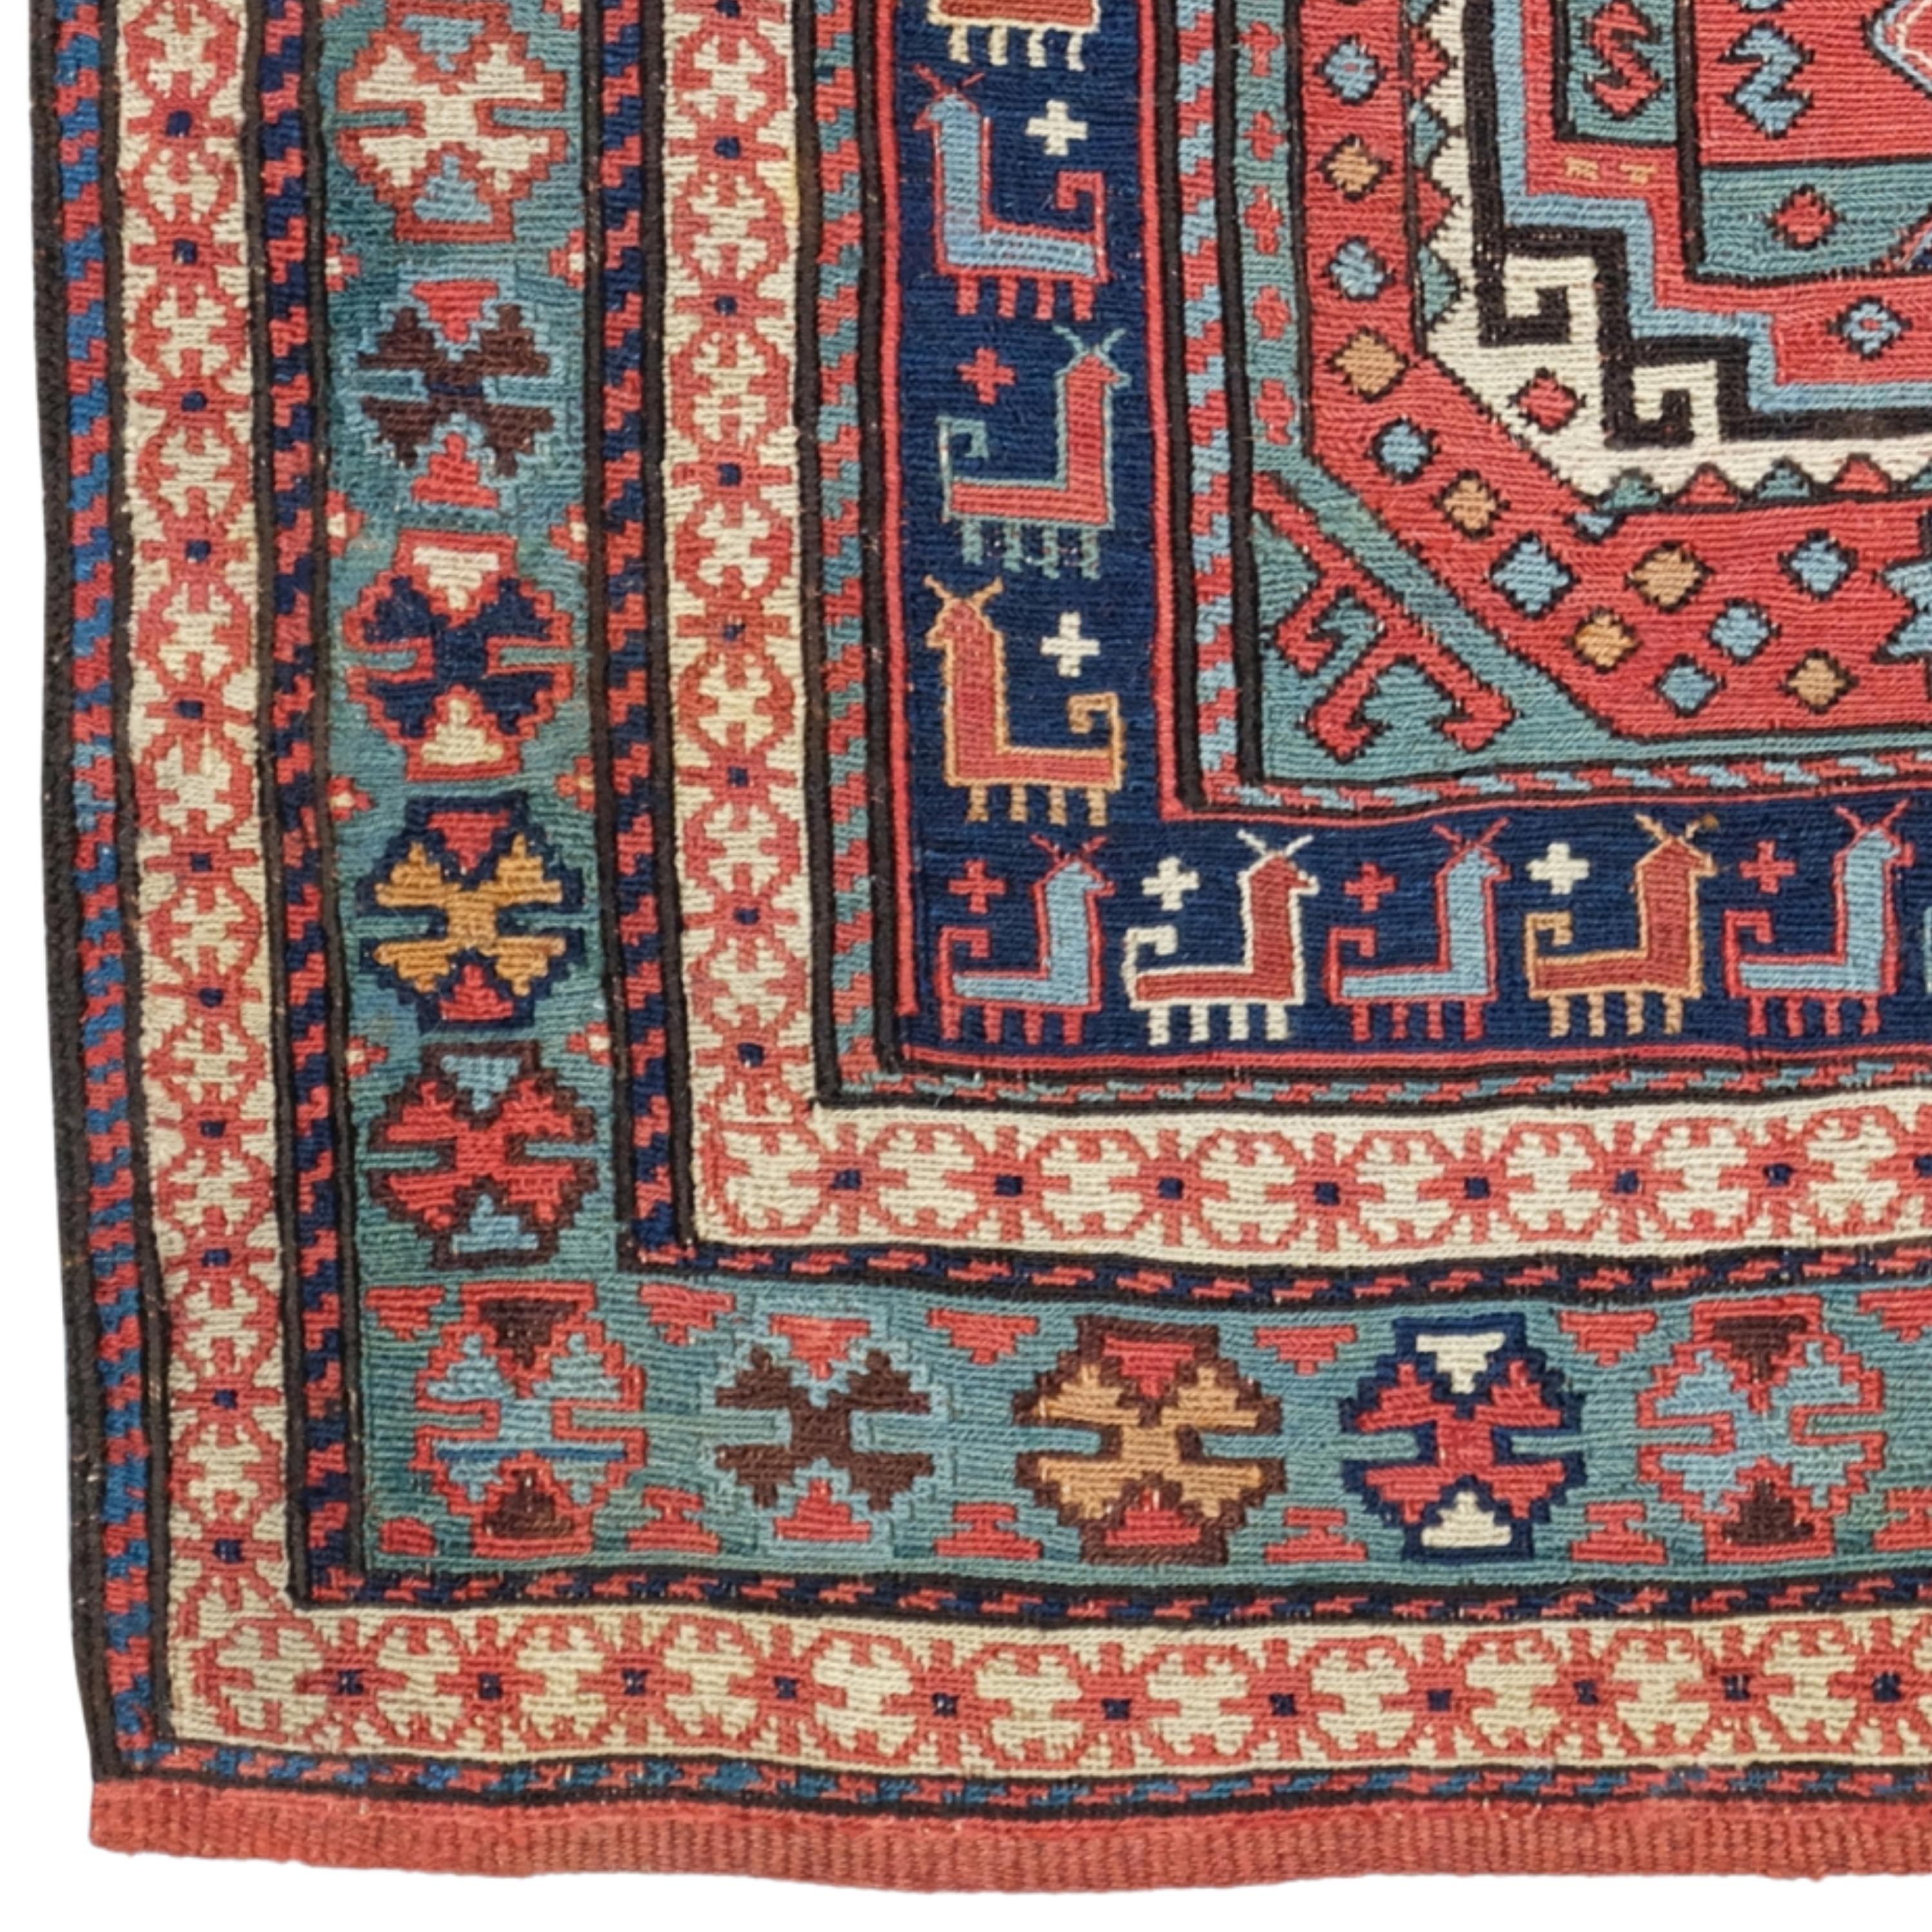 19th Century Shahsavan Bag Face
Size: 58x60 cm

This impressive 19th century Shahsavan Bag Face Tapestry is a masterpiece reflecting the elegant and sophisticated craftsmanship of a historic period.

Rich Patterns: The carpet is decorated with